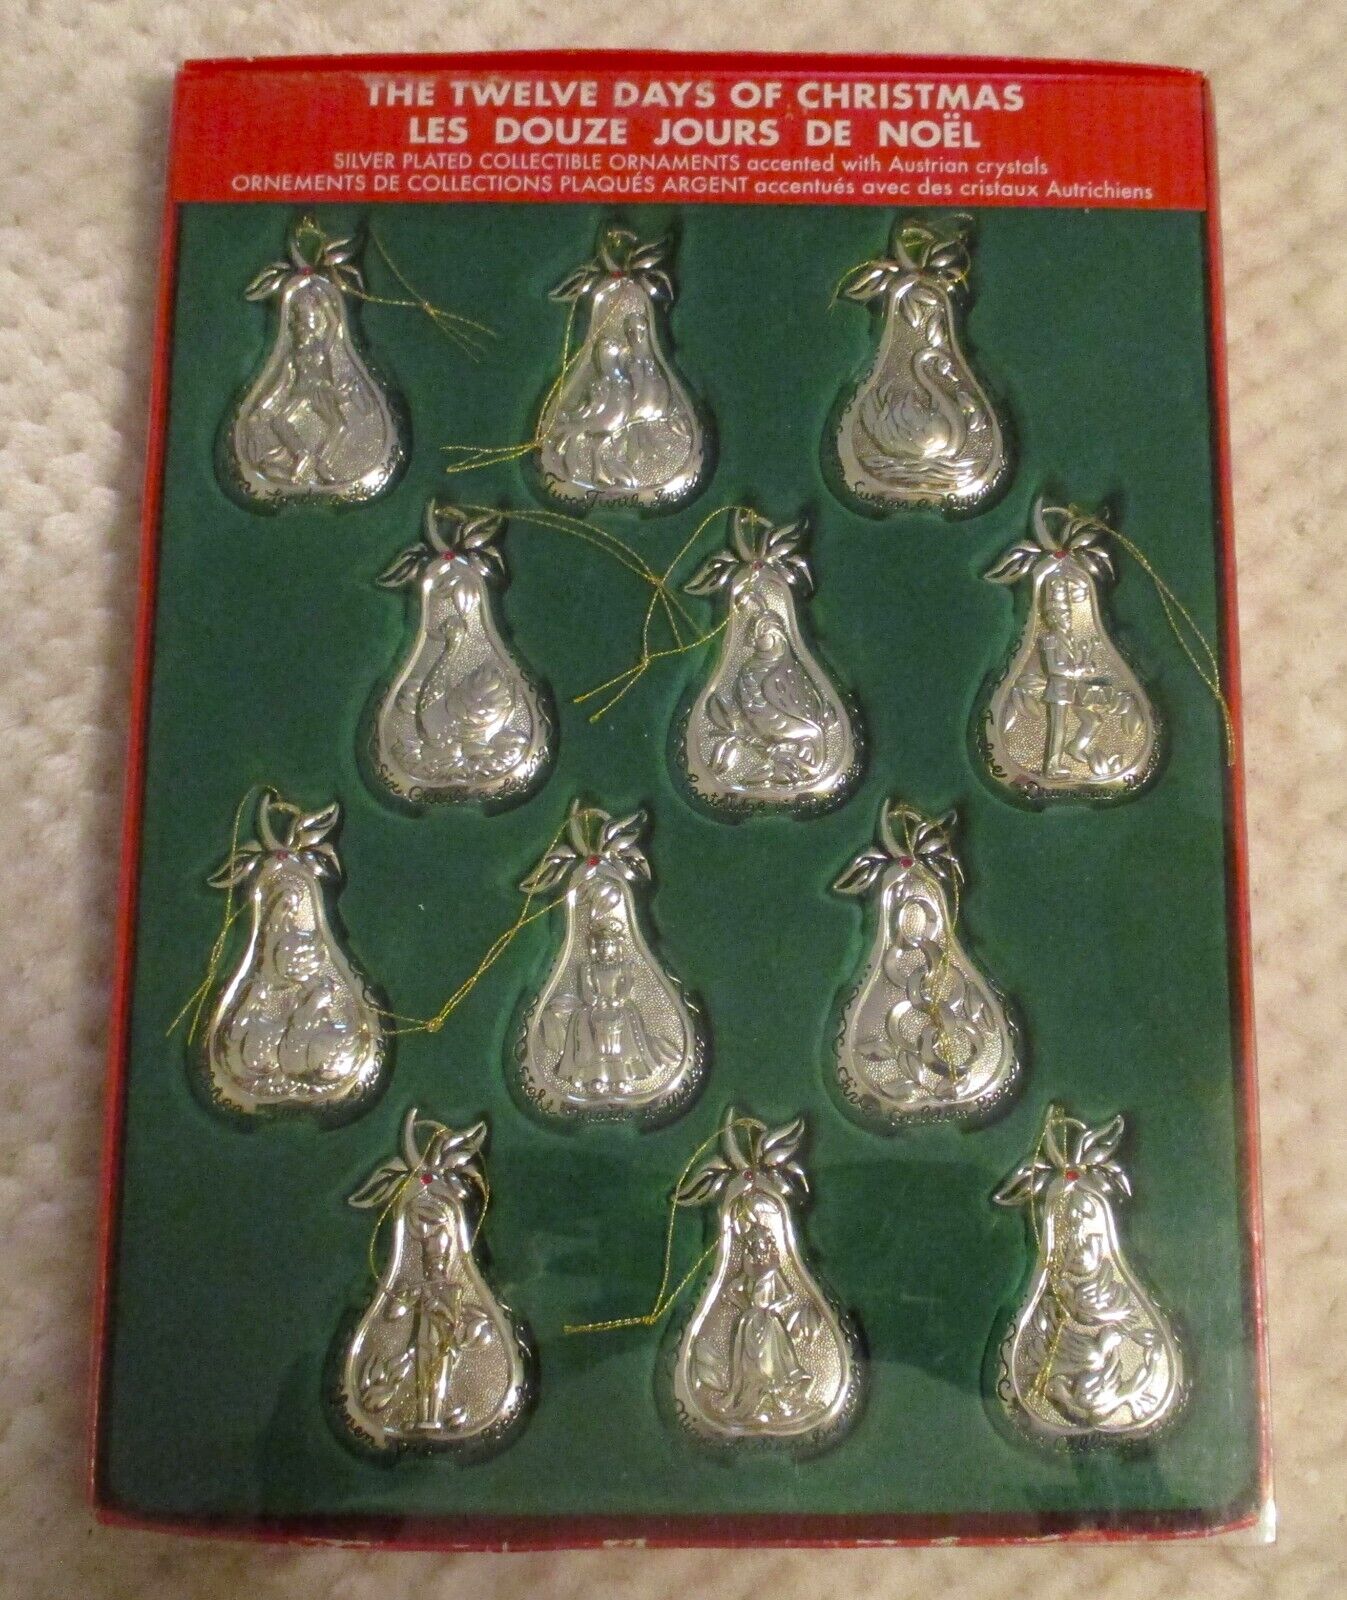 Vintage 12 Days Of Christmas Ornaments, Silver Plated, With Swarovski Crystals